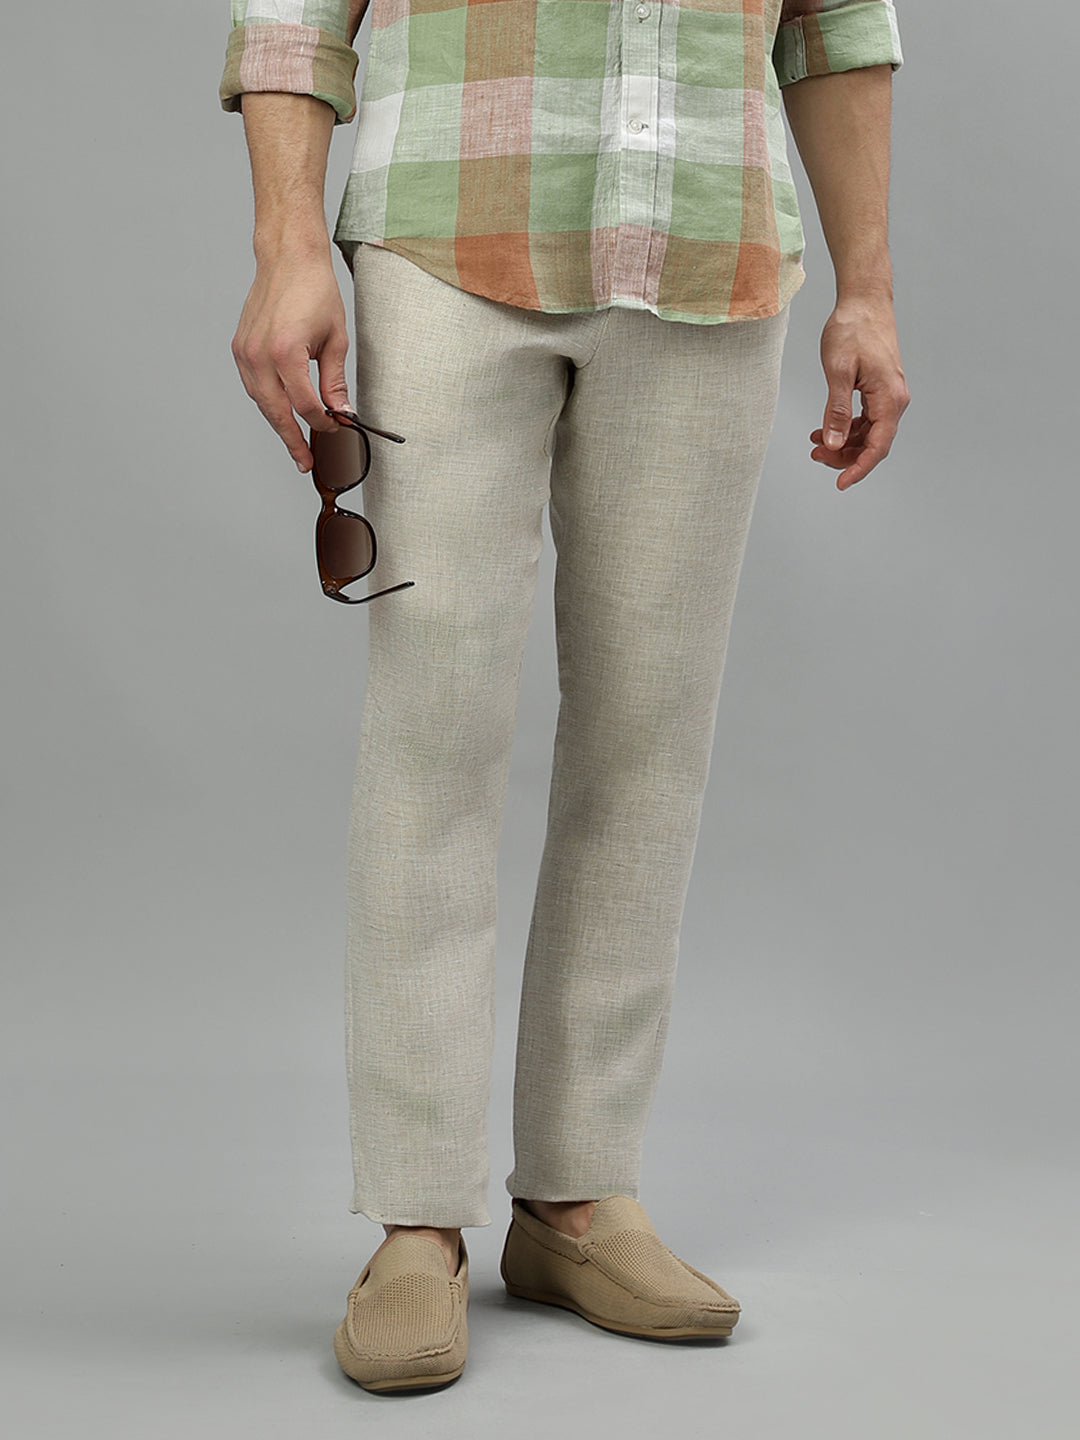 Textured flowy trousers - Woman | MANGO OUTLET India